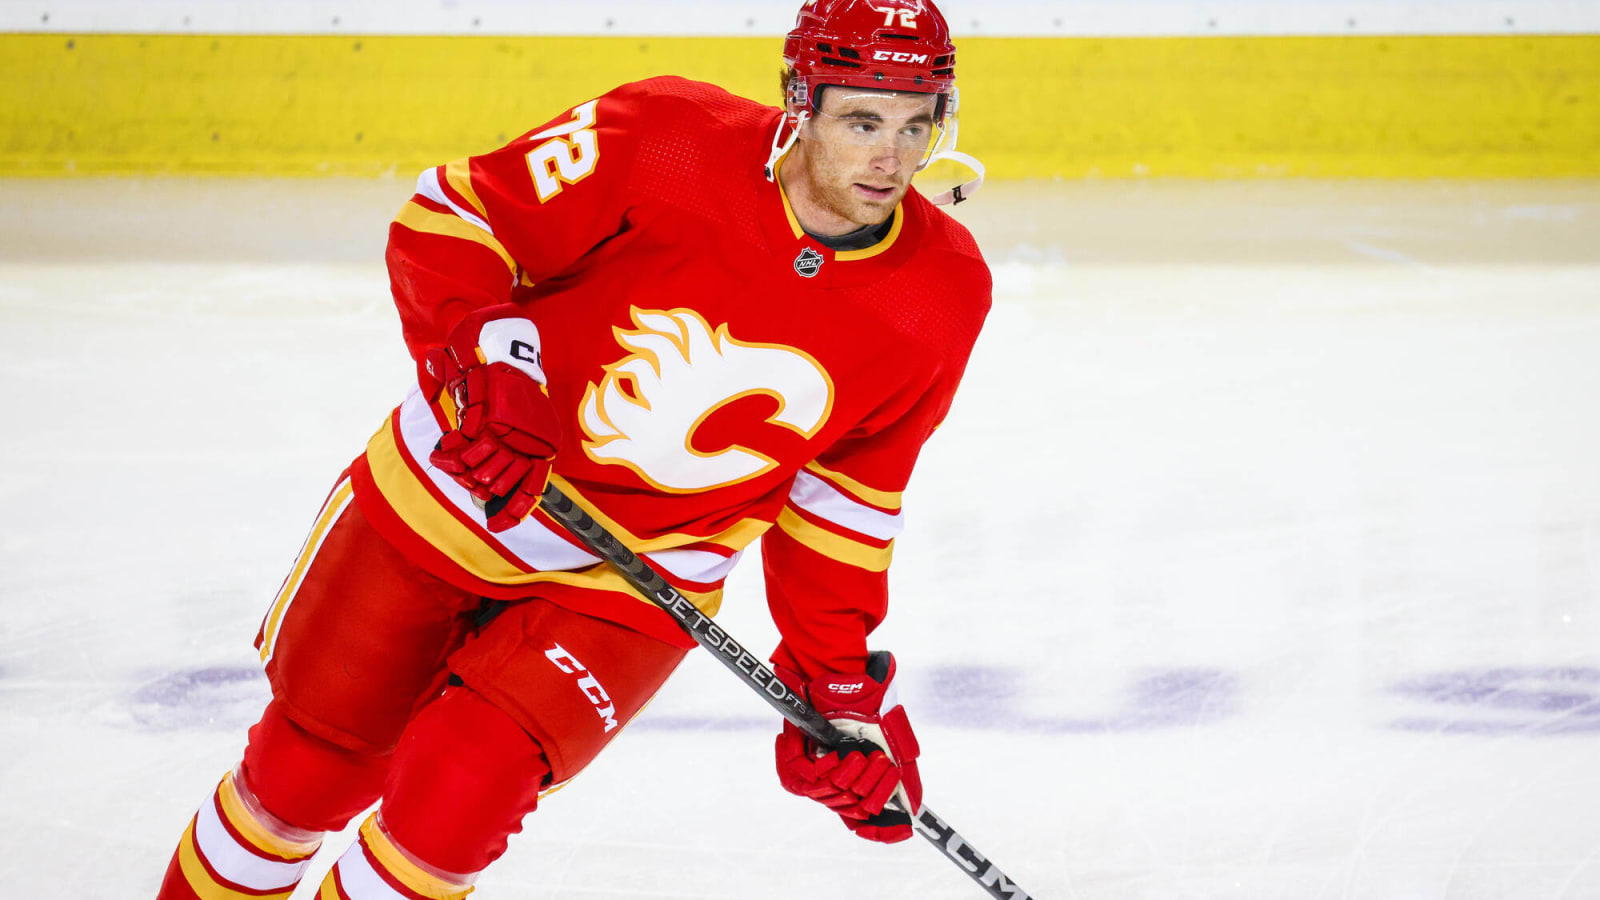 Calgary Flames prospect Jeremie Poirier requires surgery for laceration, out indefinitely